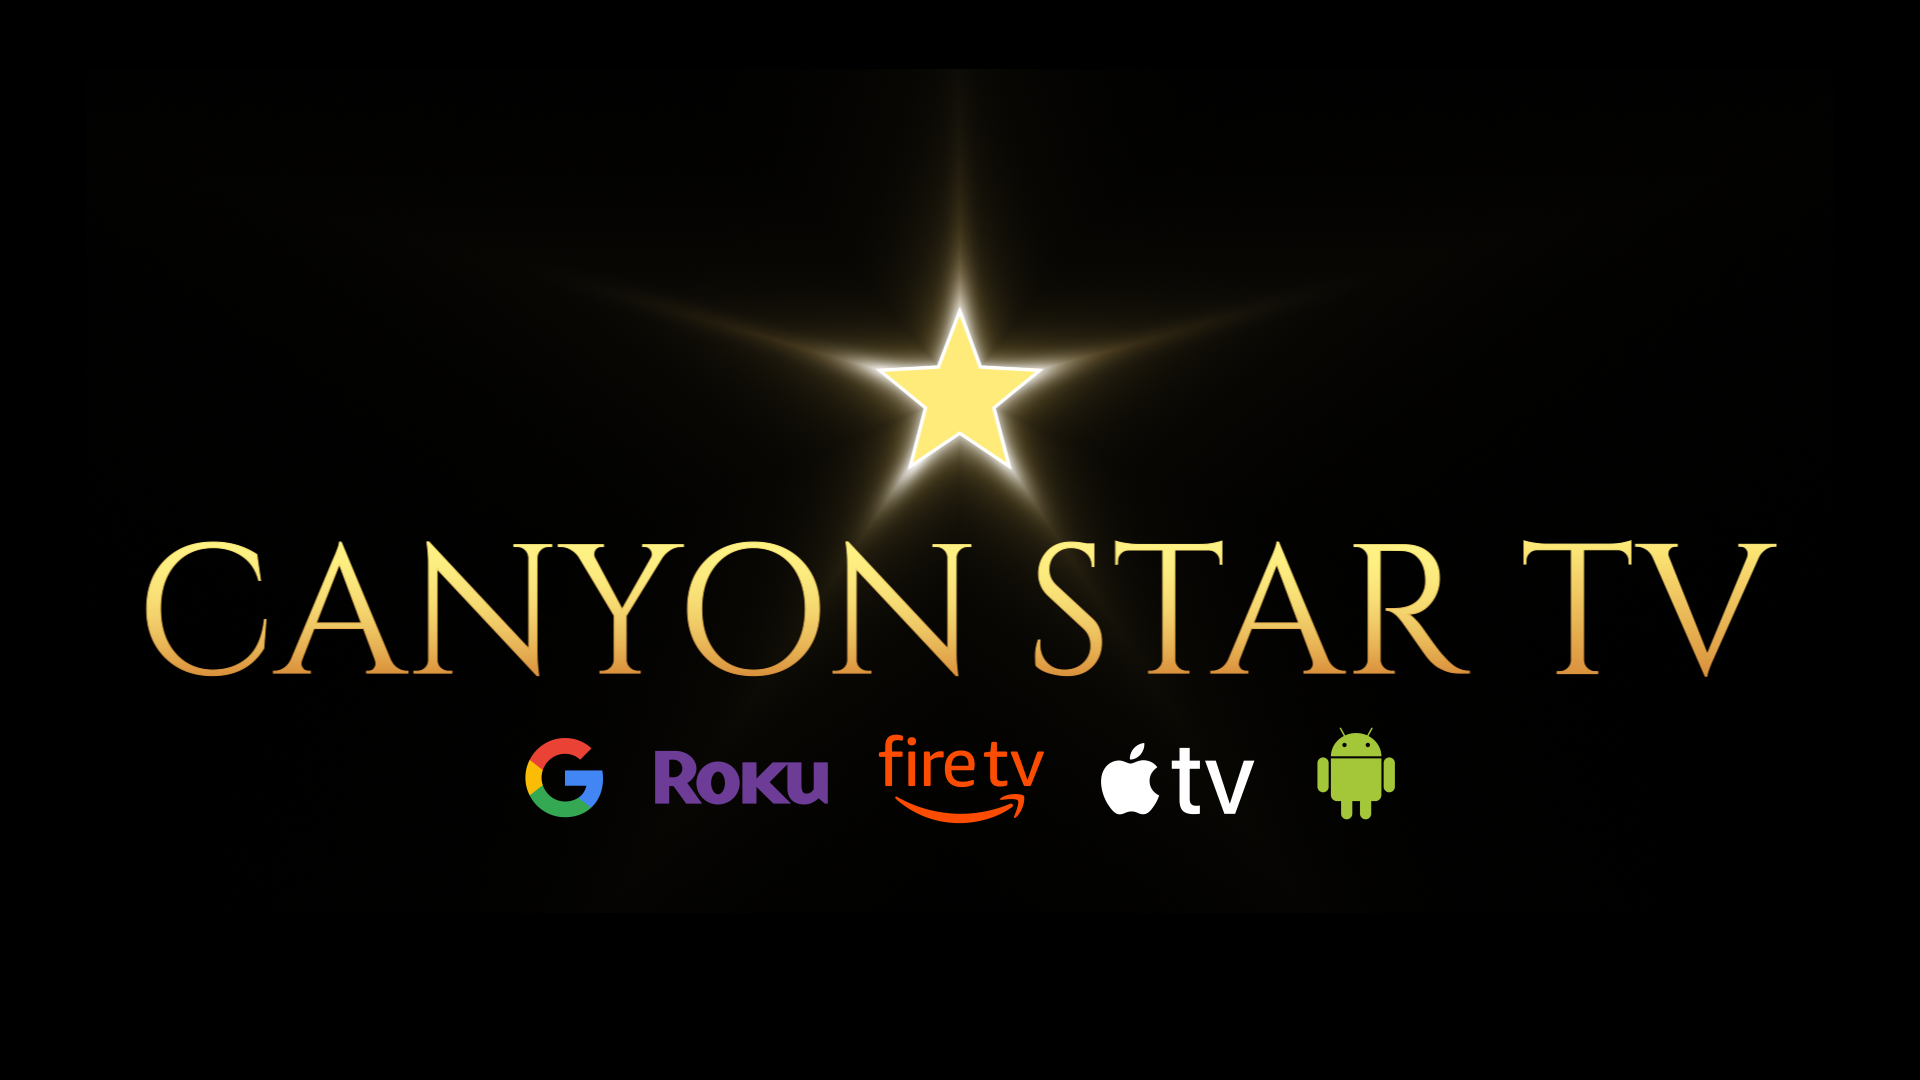 Canyon Star TV Adds 30A TV Channels To Lineup